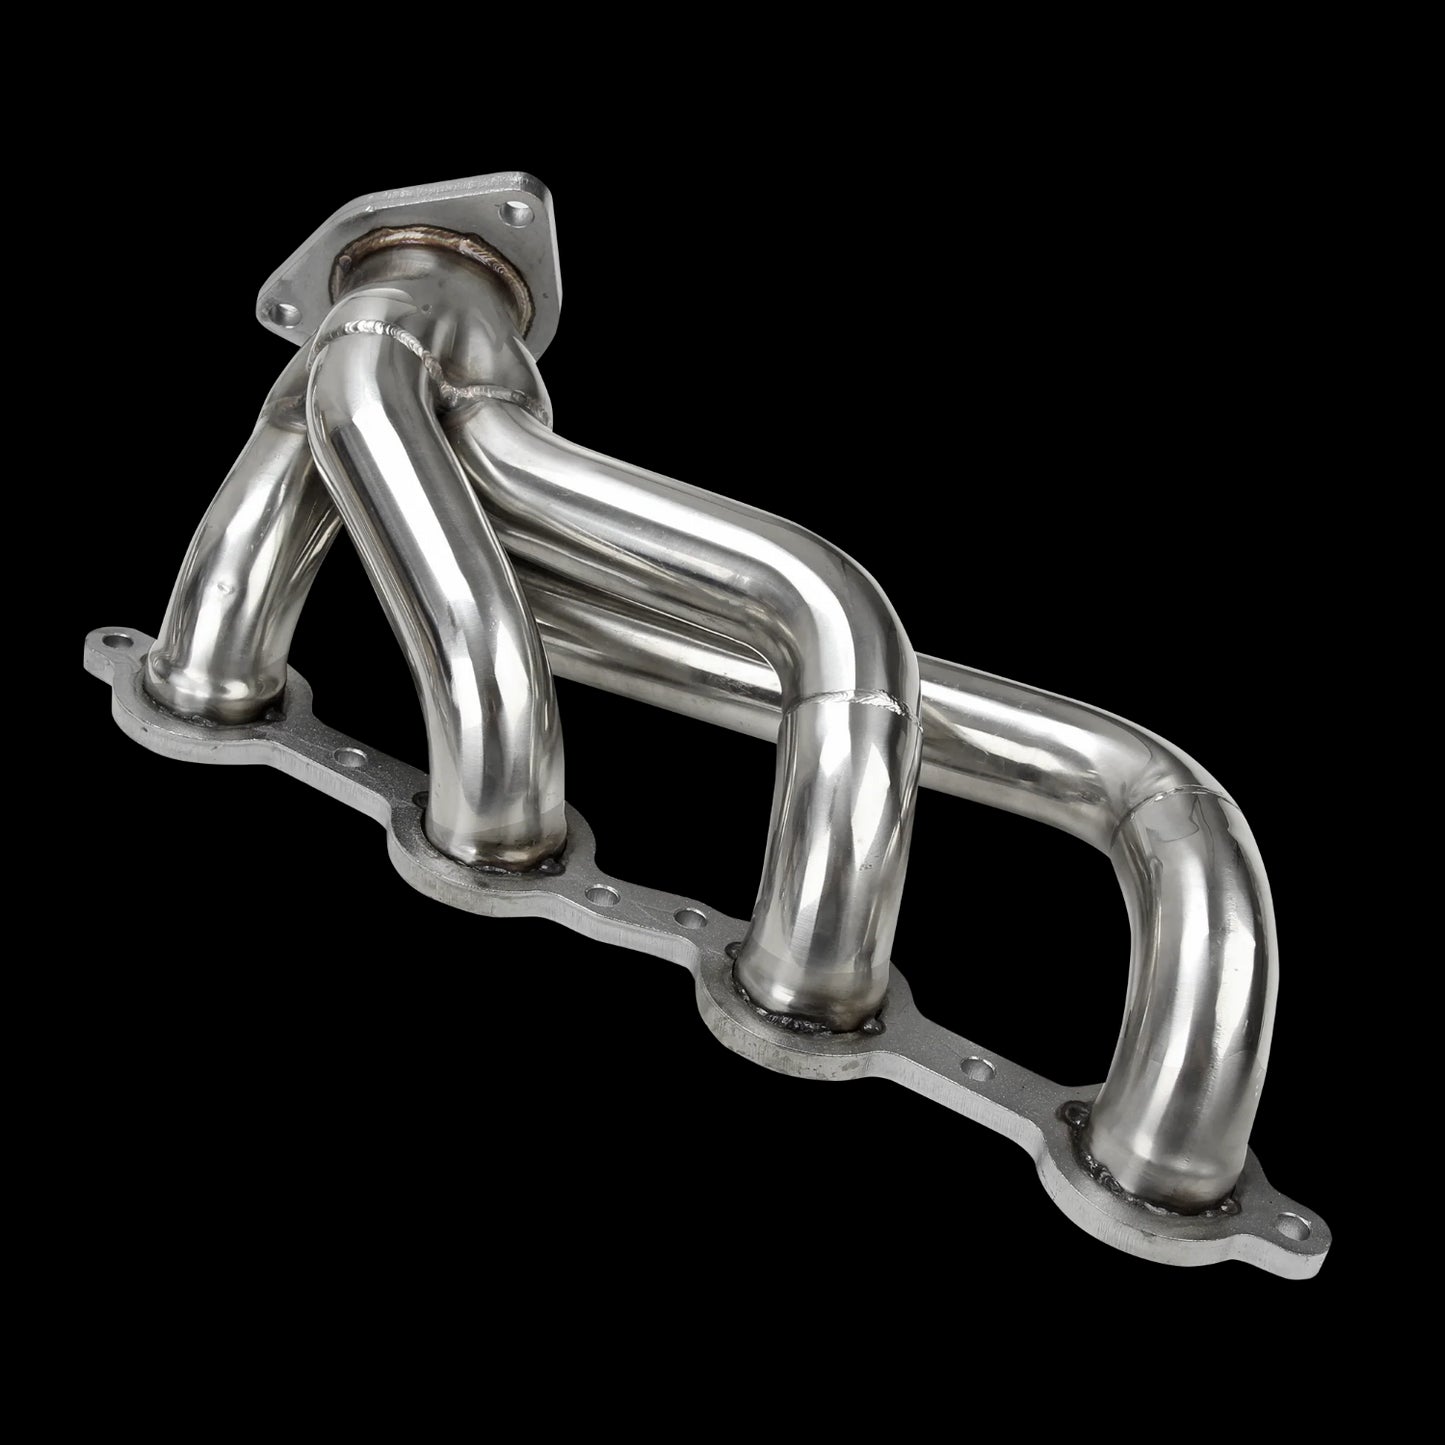 Auto Exhaust Headers for 2000-2001 GMC YUKON 4.8L 5.3L and 1999-2001 GMC SIERRA 1500 2500